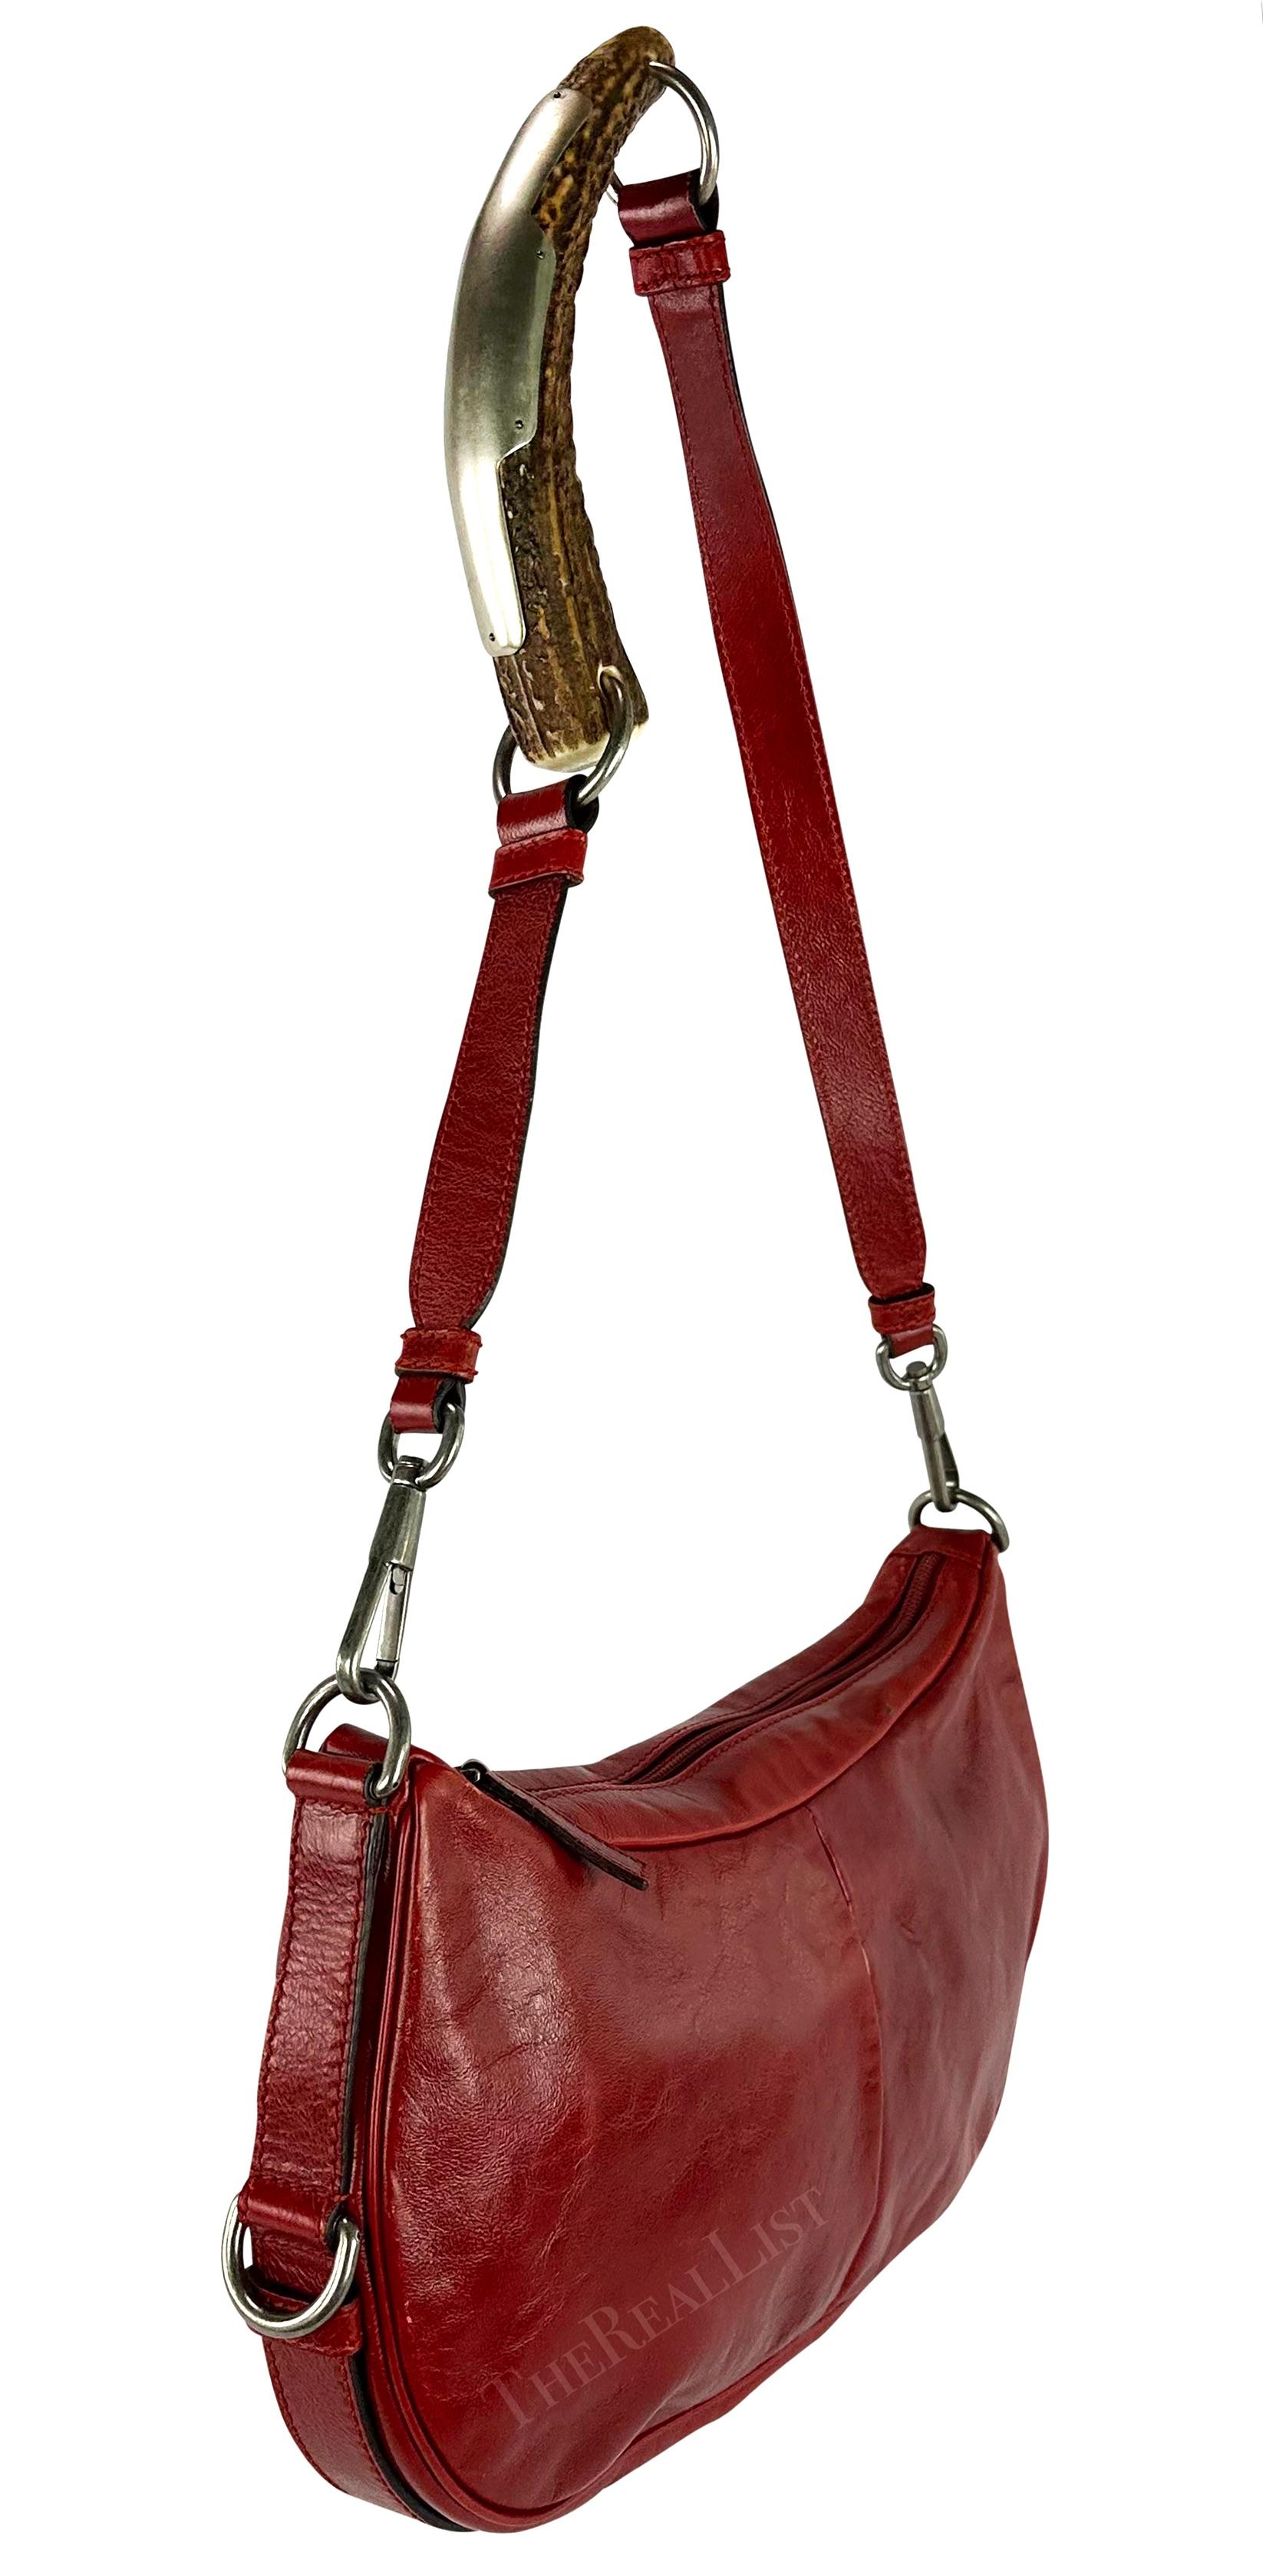 2000s Yves Saint Laurent by Tom Ford Red Leather Mombassa Shoulder Bag For Sale 2